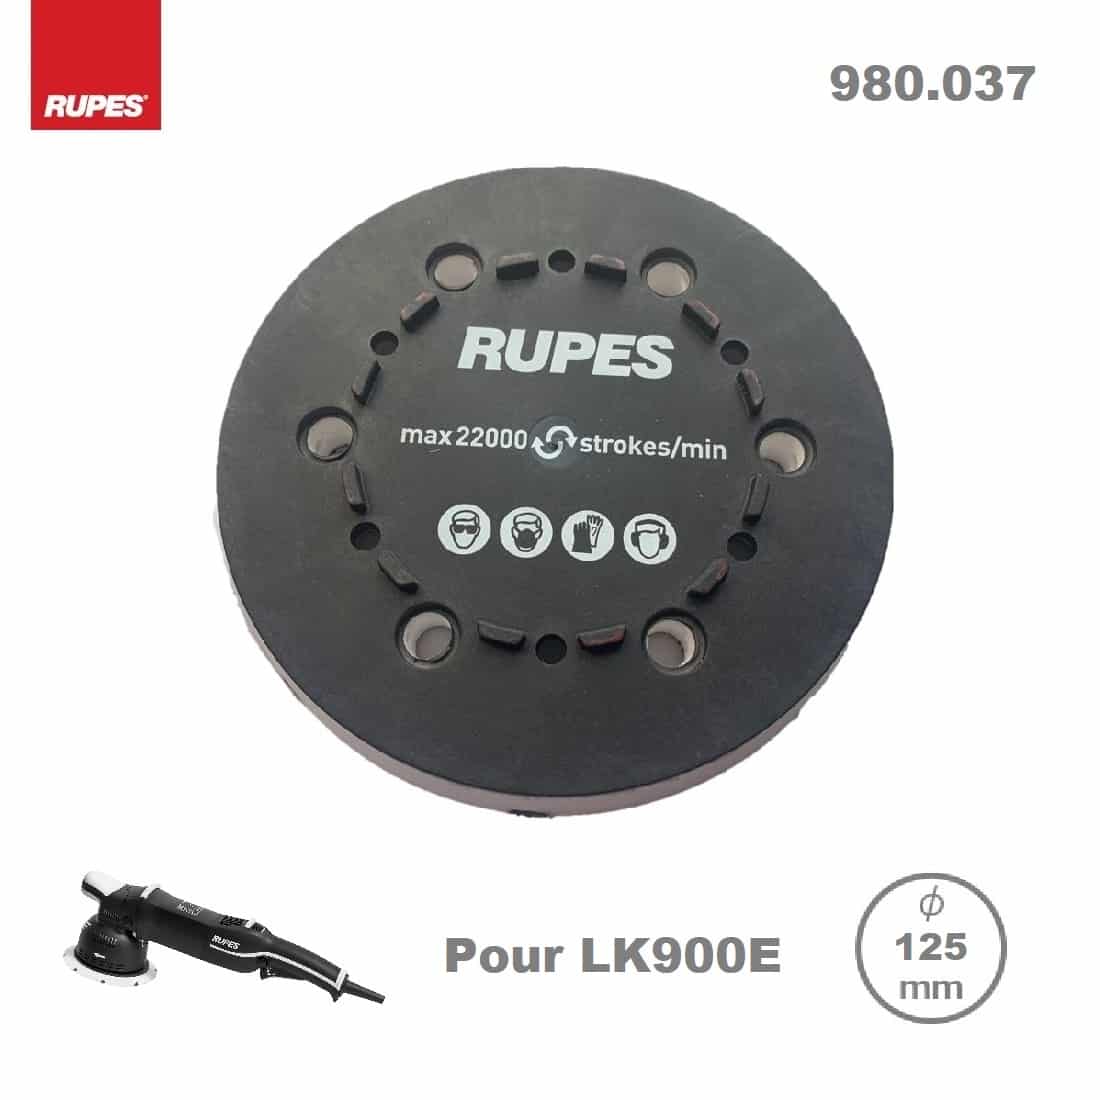 [980.037] Backing Plate Rupes 125mm pour Rupes LK900E